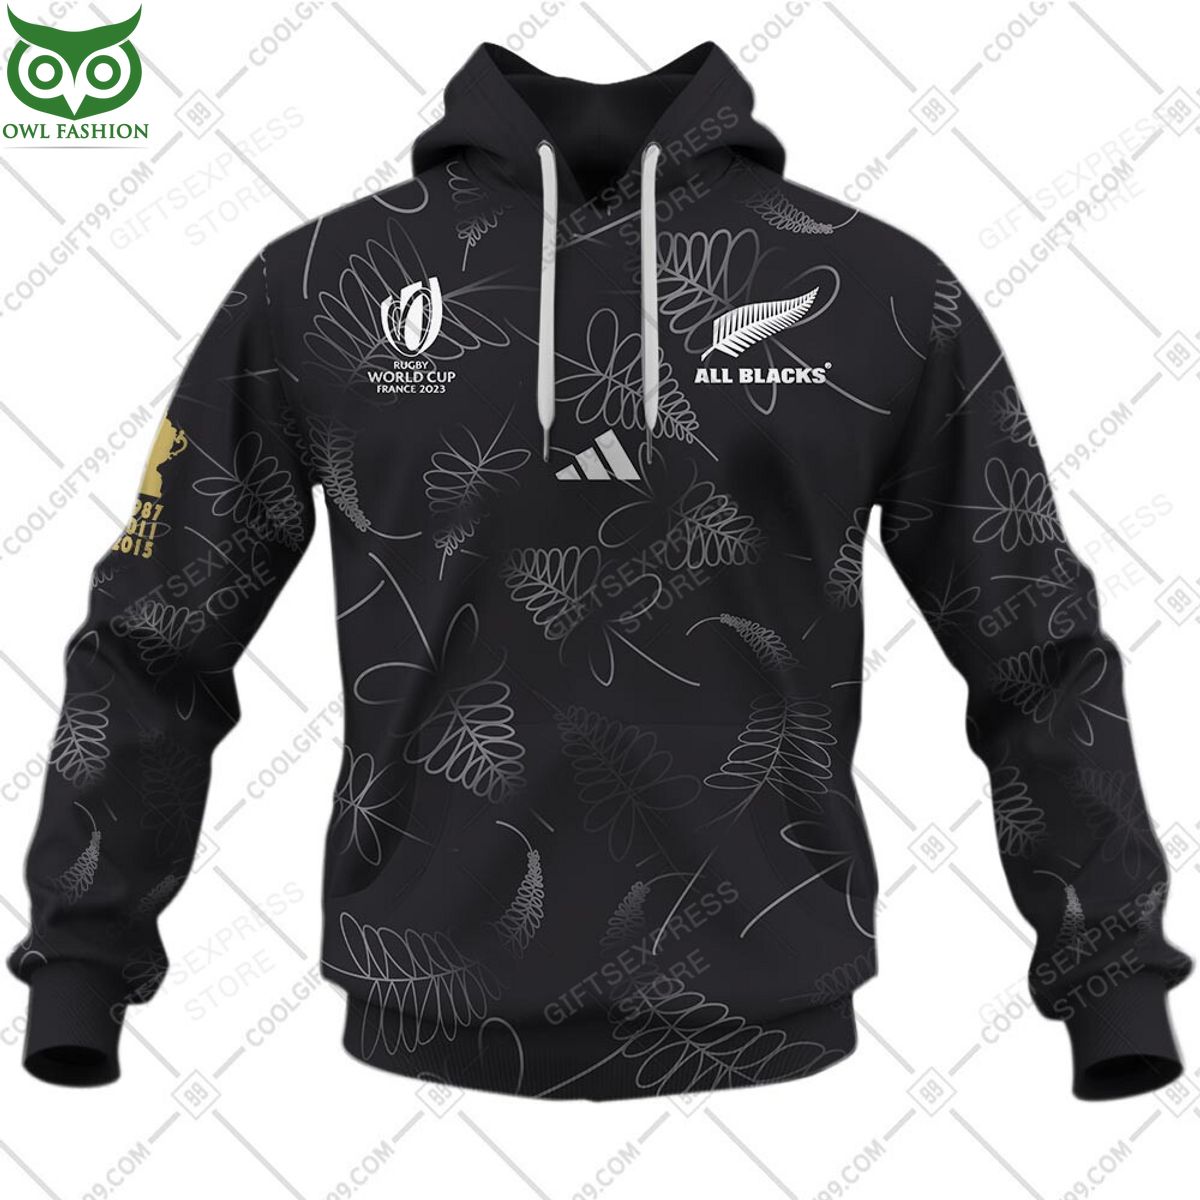 rugby world cup new zealand all black personalized 3d hoodie tshirt 6 c7HCf.jpg